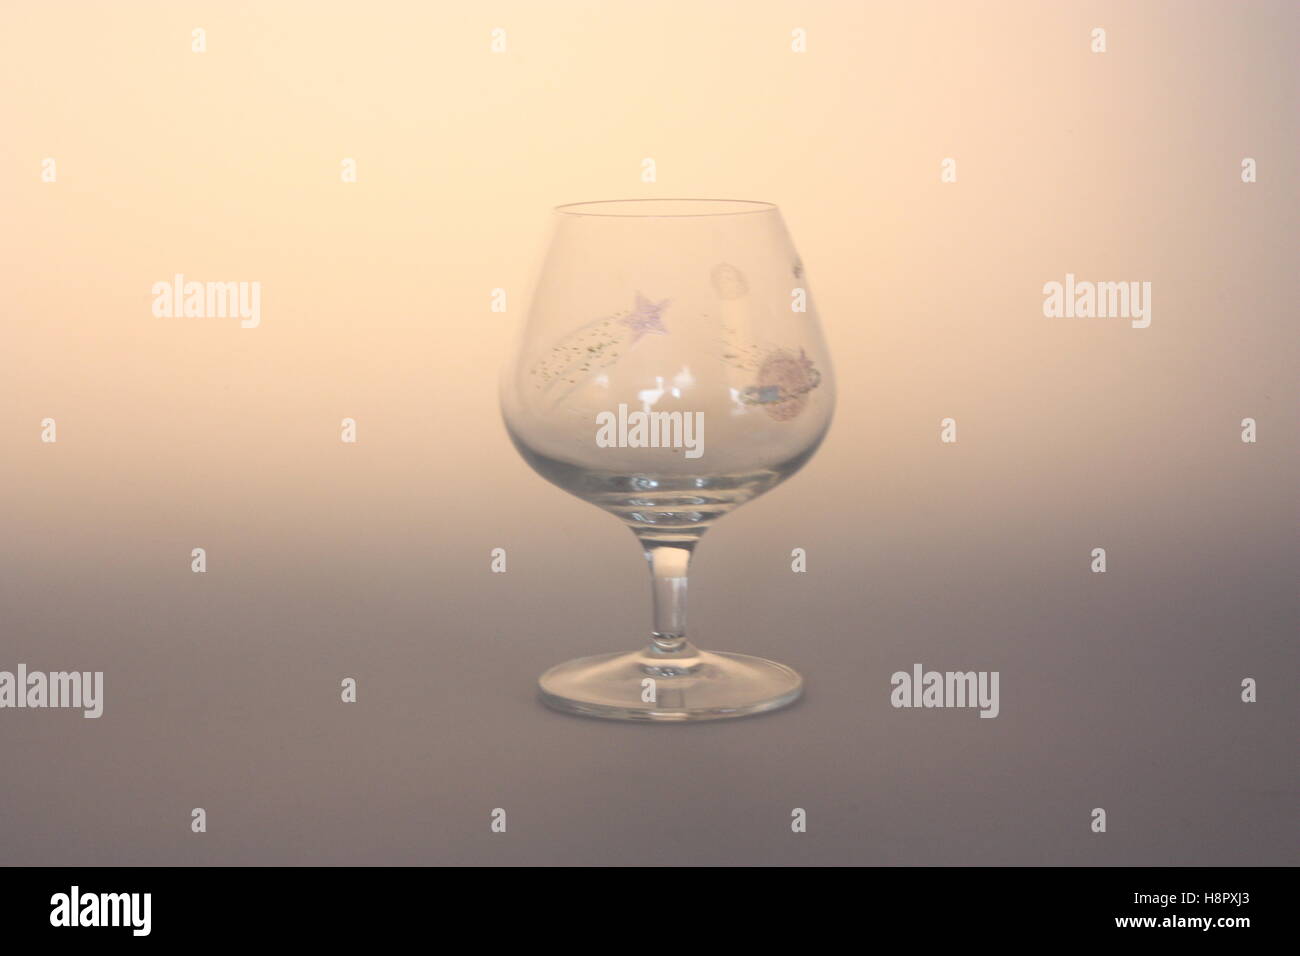 Brandy glass with a space pattern painted on Stock Photo